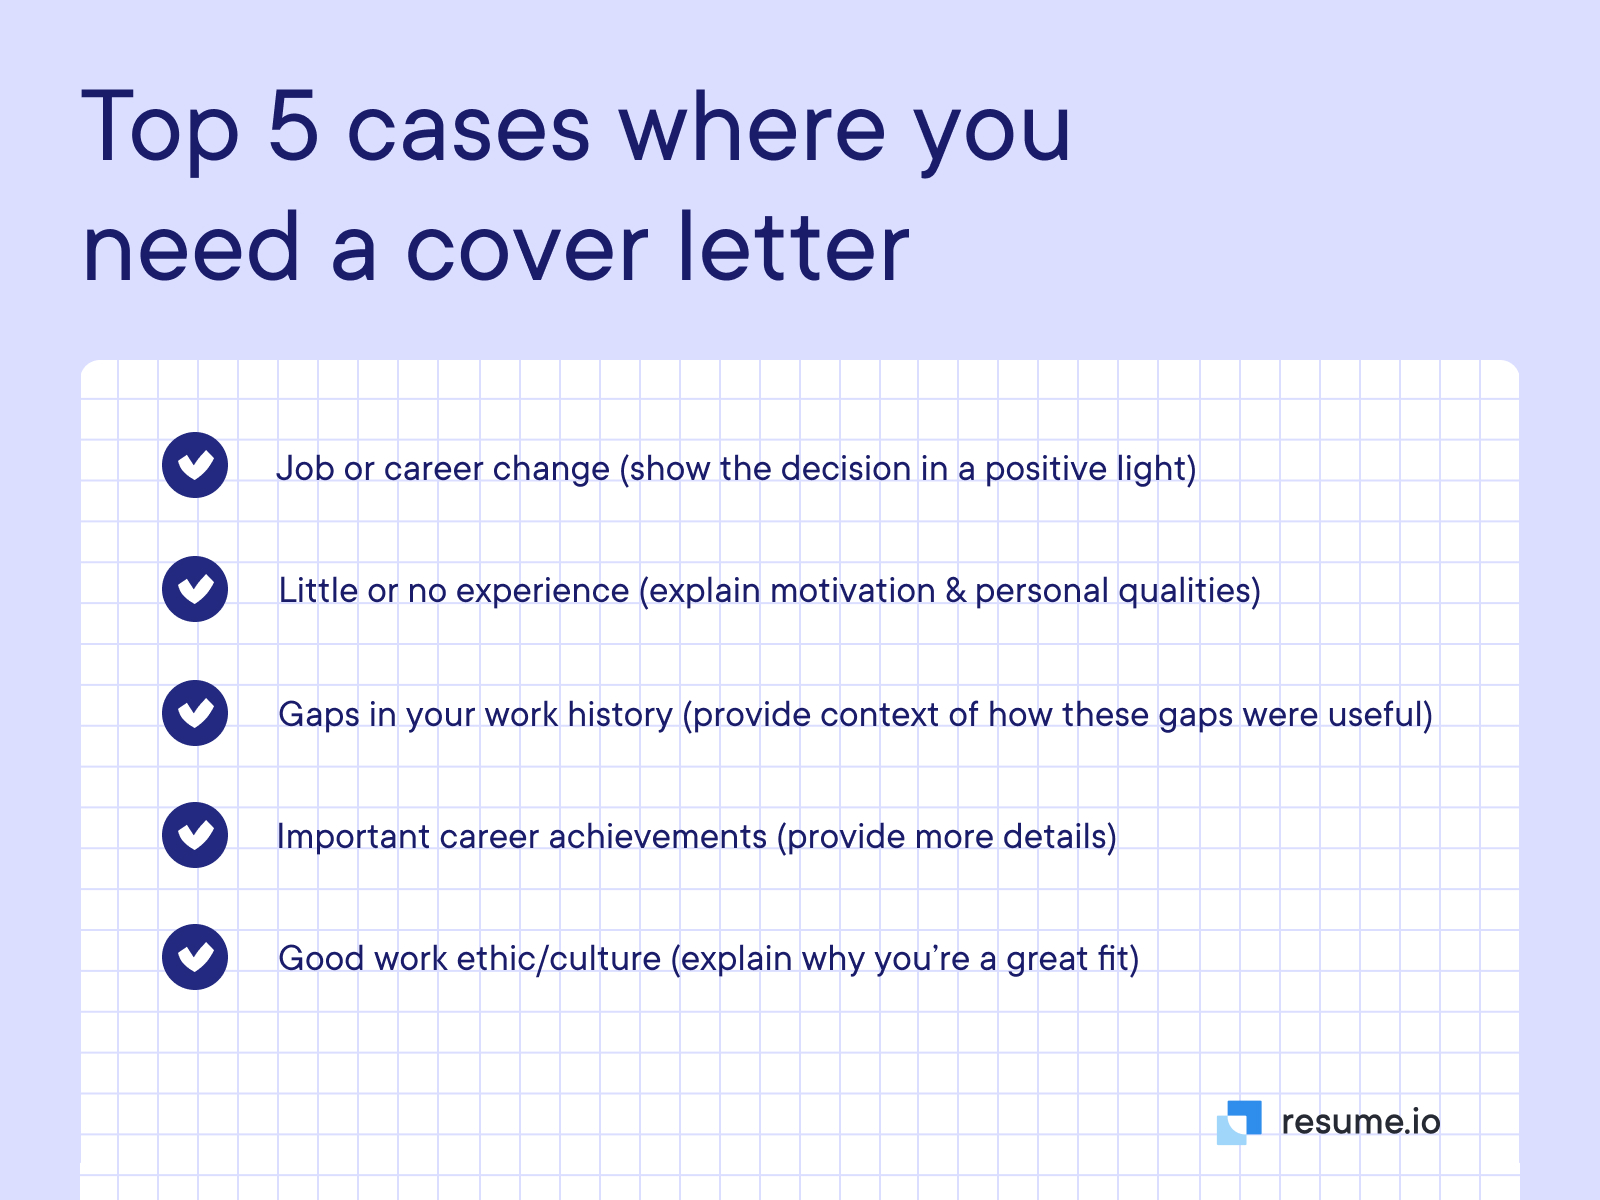 Top 5 cases where you need a cover letter